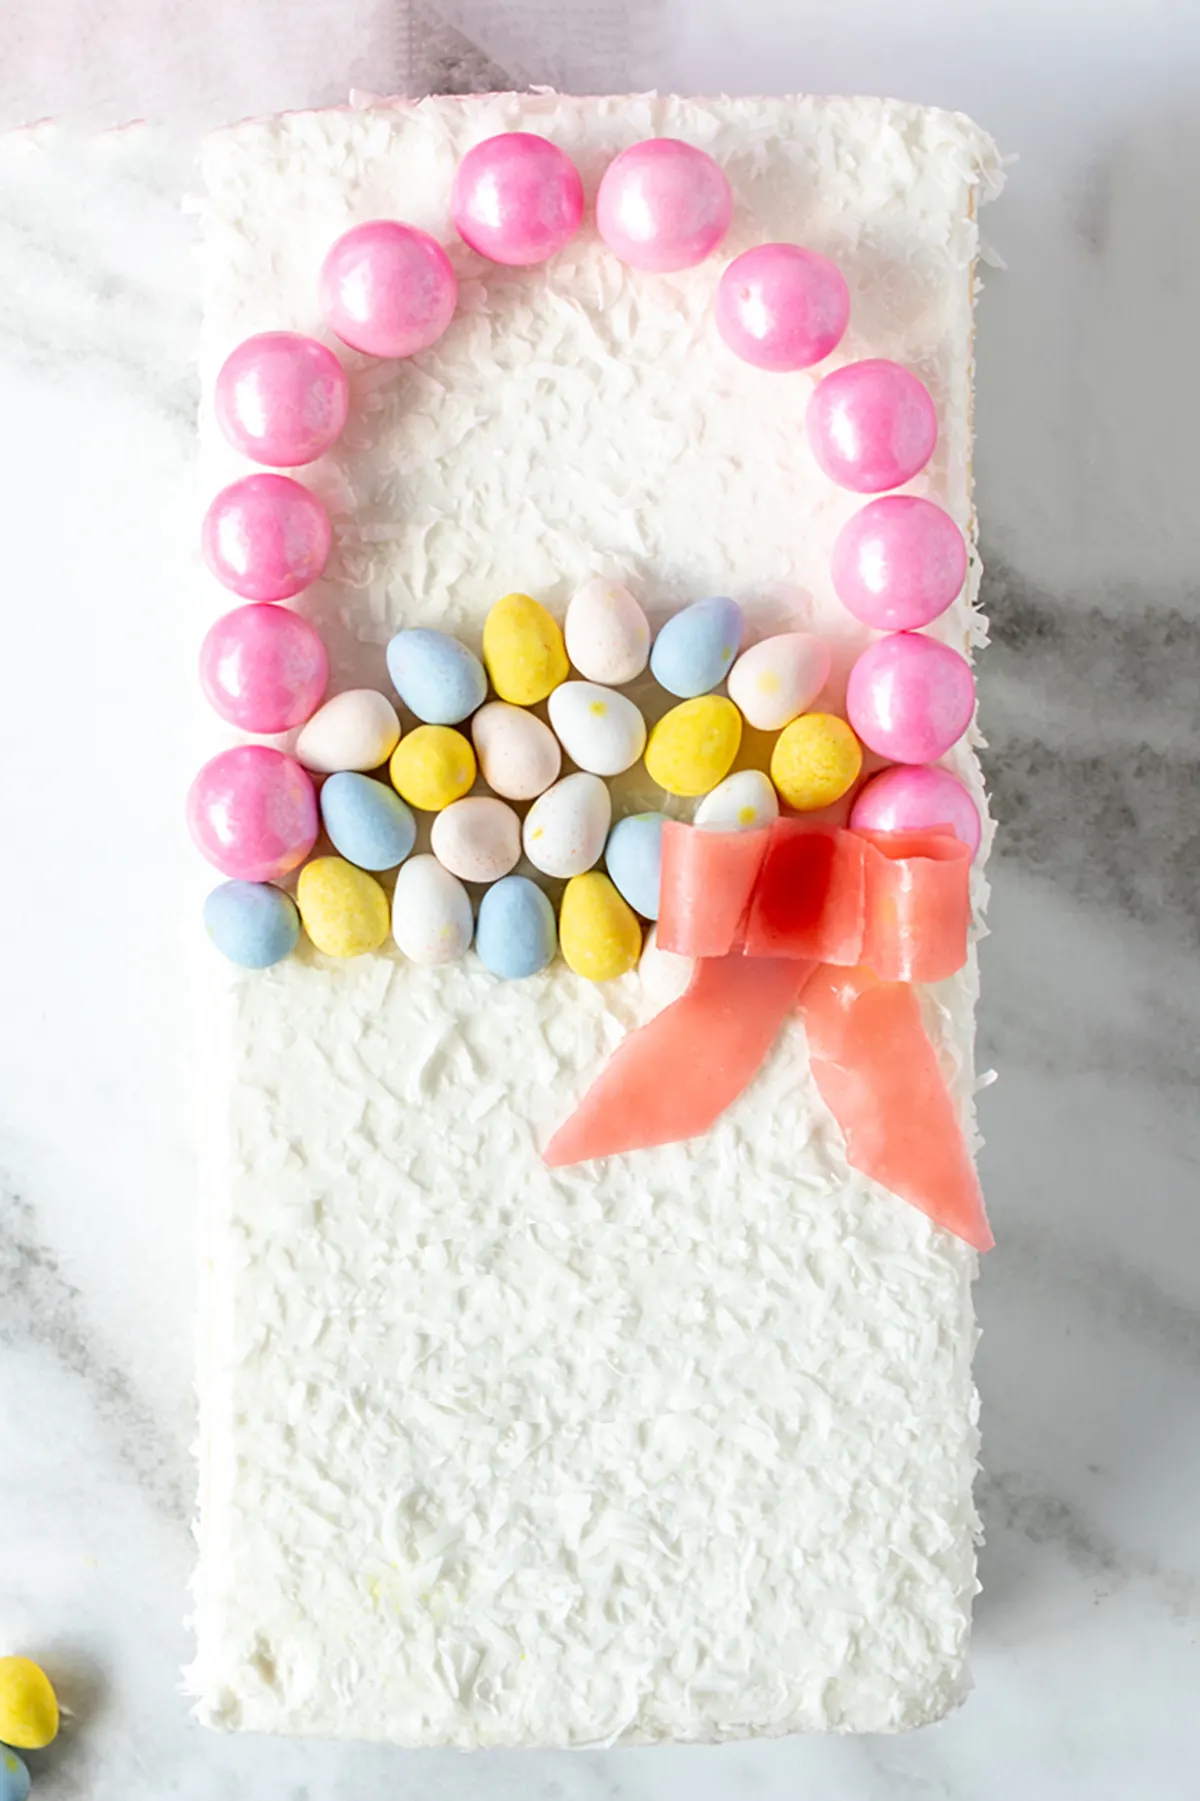 making an easy easter basket cake using candy, gumballs and fruit snacks